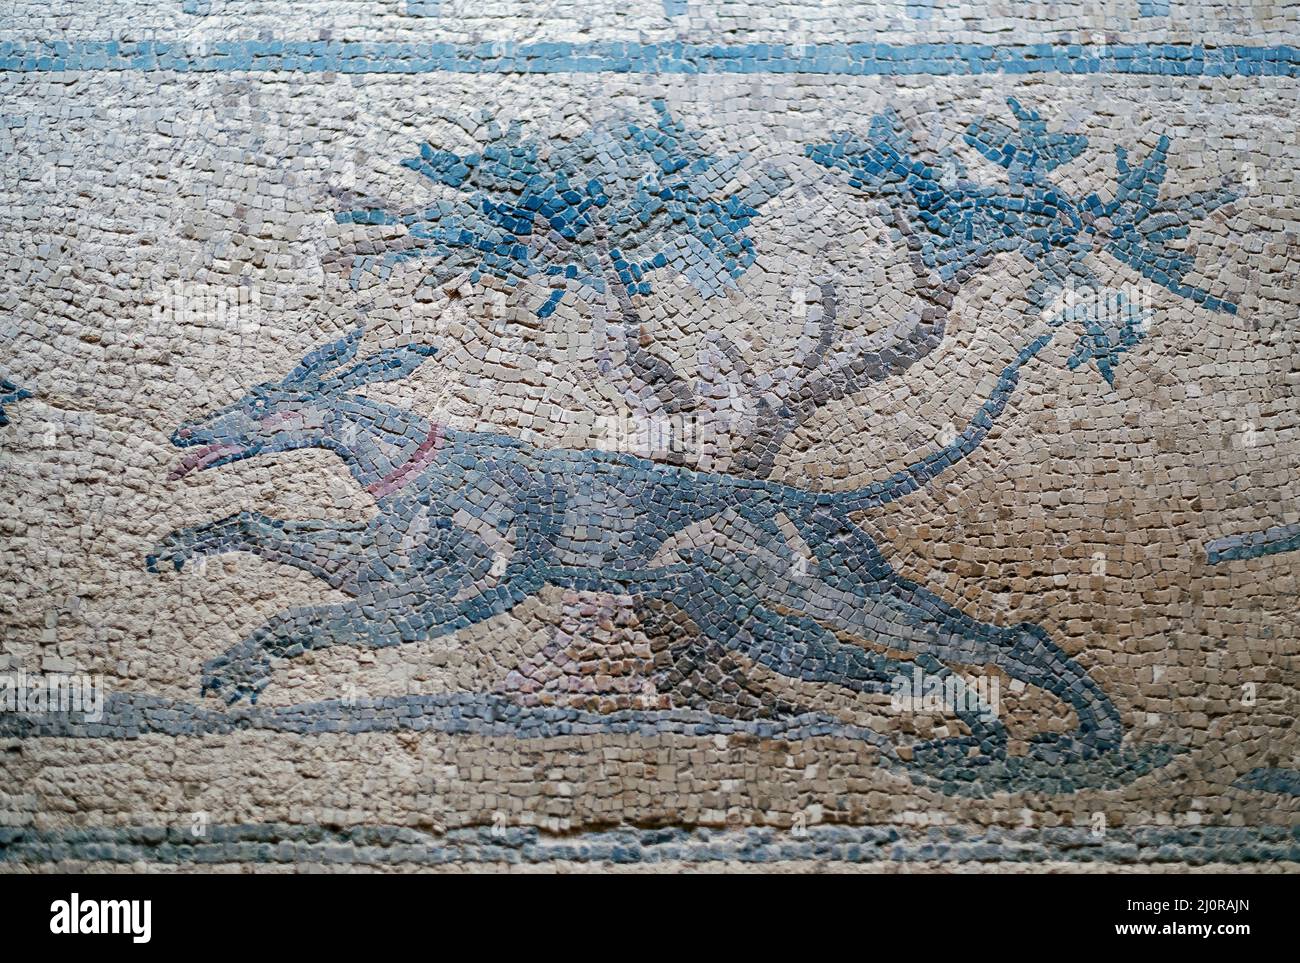 A hunting scene mosaic showing a hunting dog in the House of Dionysus, Paphos Archaeological park, Paphos, Cyprus. Stock Photo